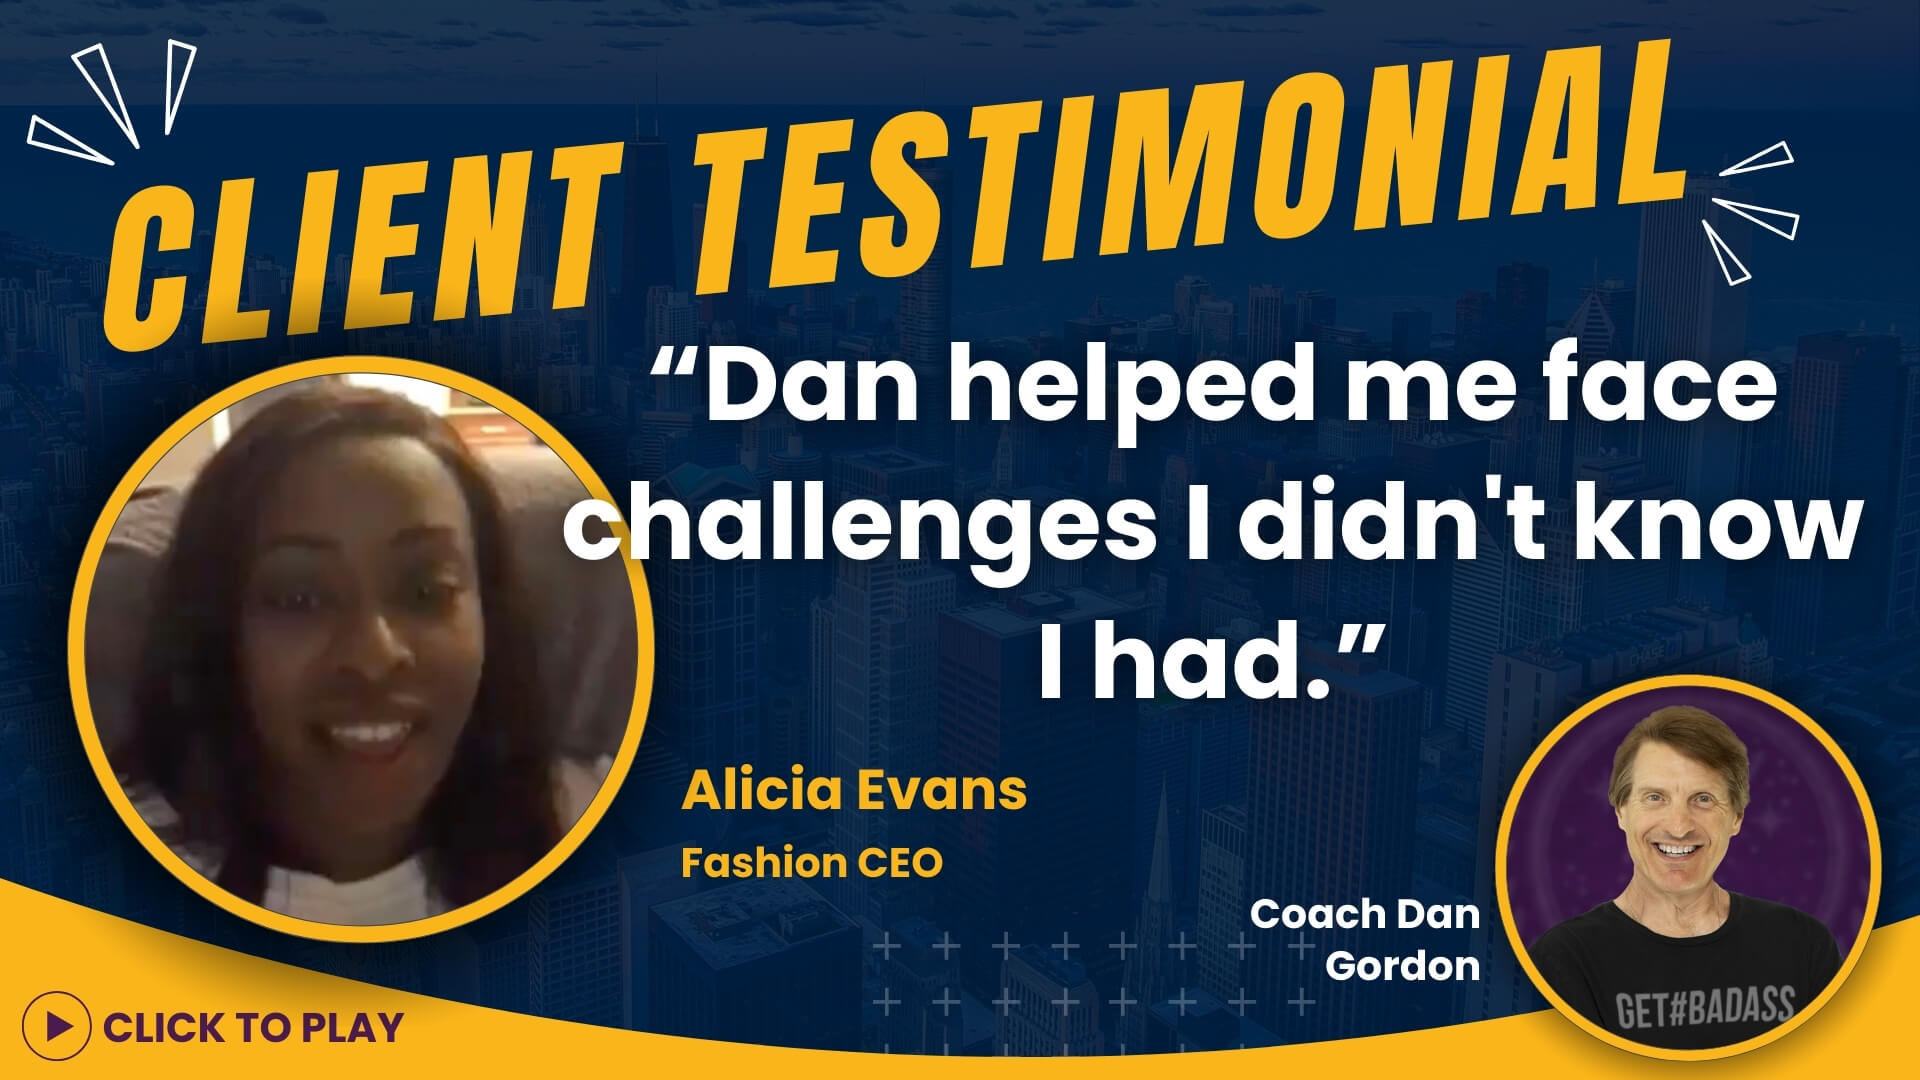 Fashion CEO Alicia Evans commends Coach Dan Gordon for helping her overcome unseen challenges, depicted in a client testimonial video with a clickable play button.